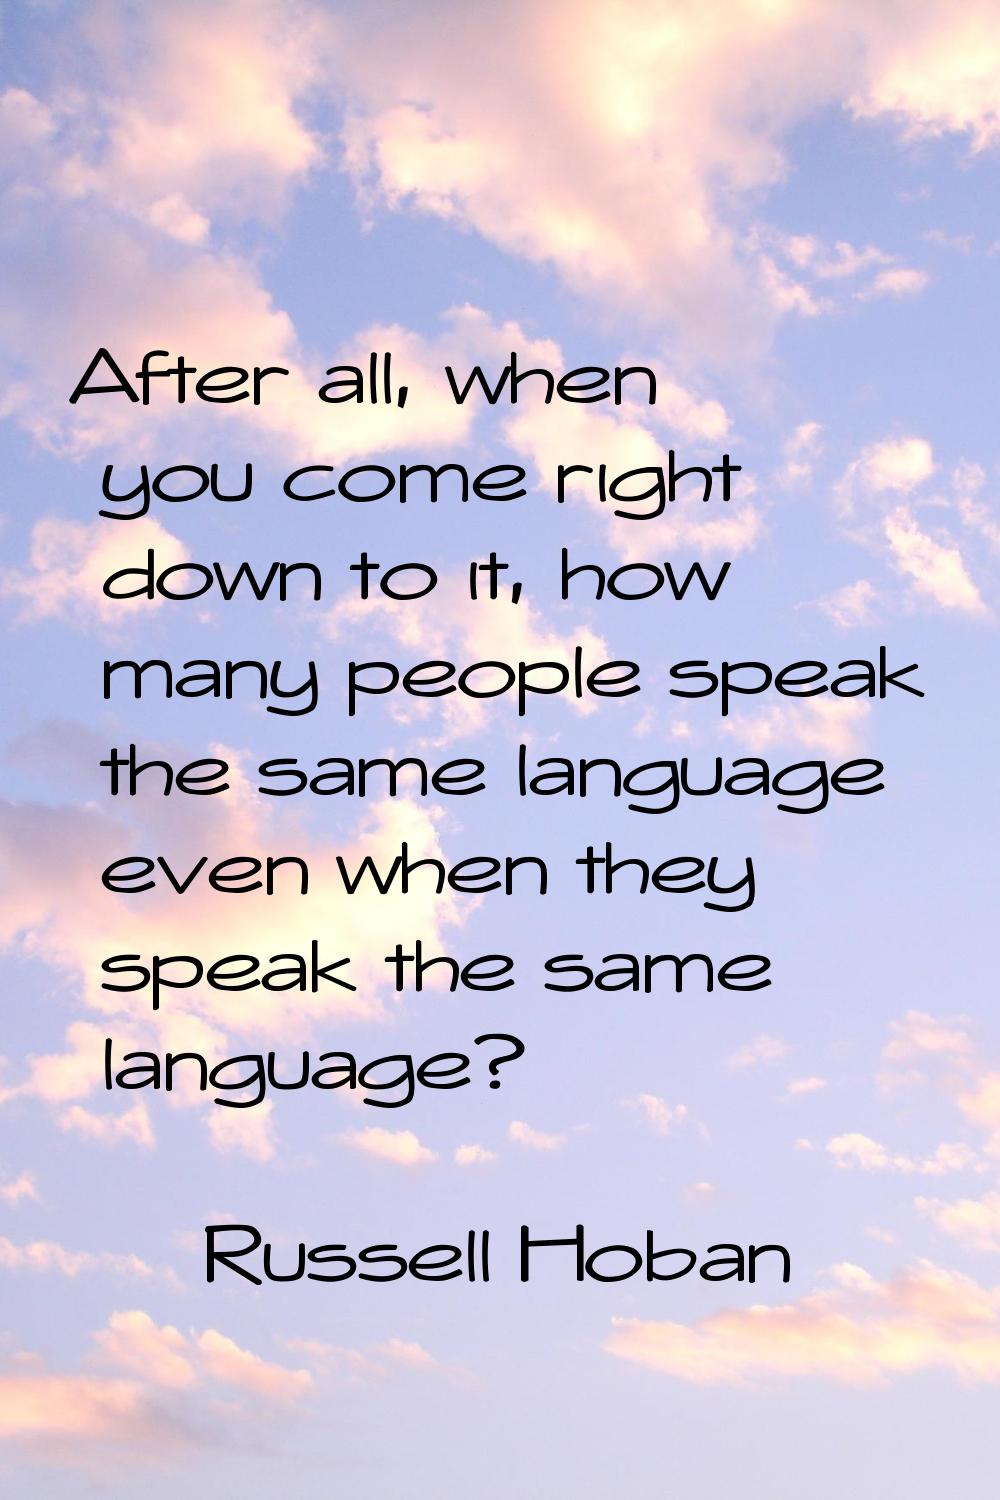 After all, when you come right down to it, how many people speak the same language even when they s